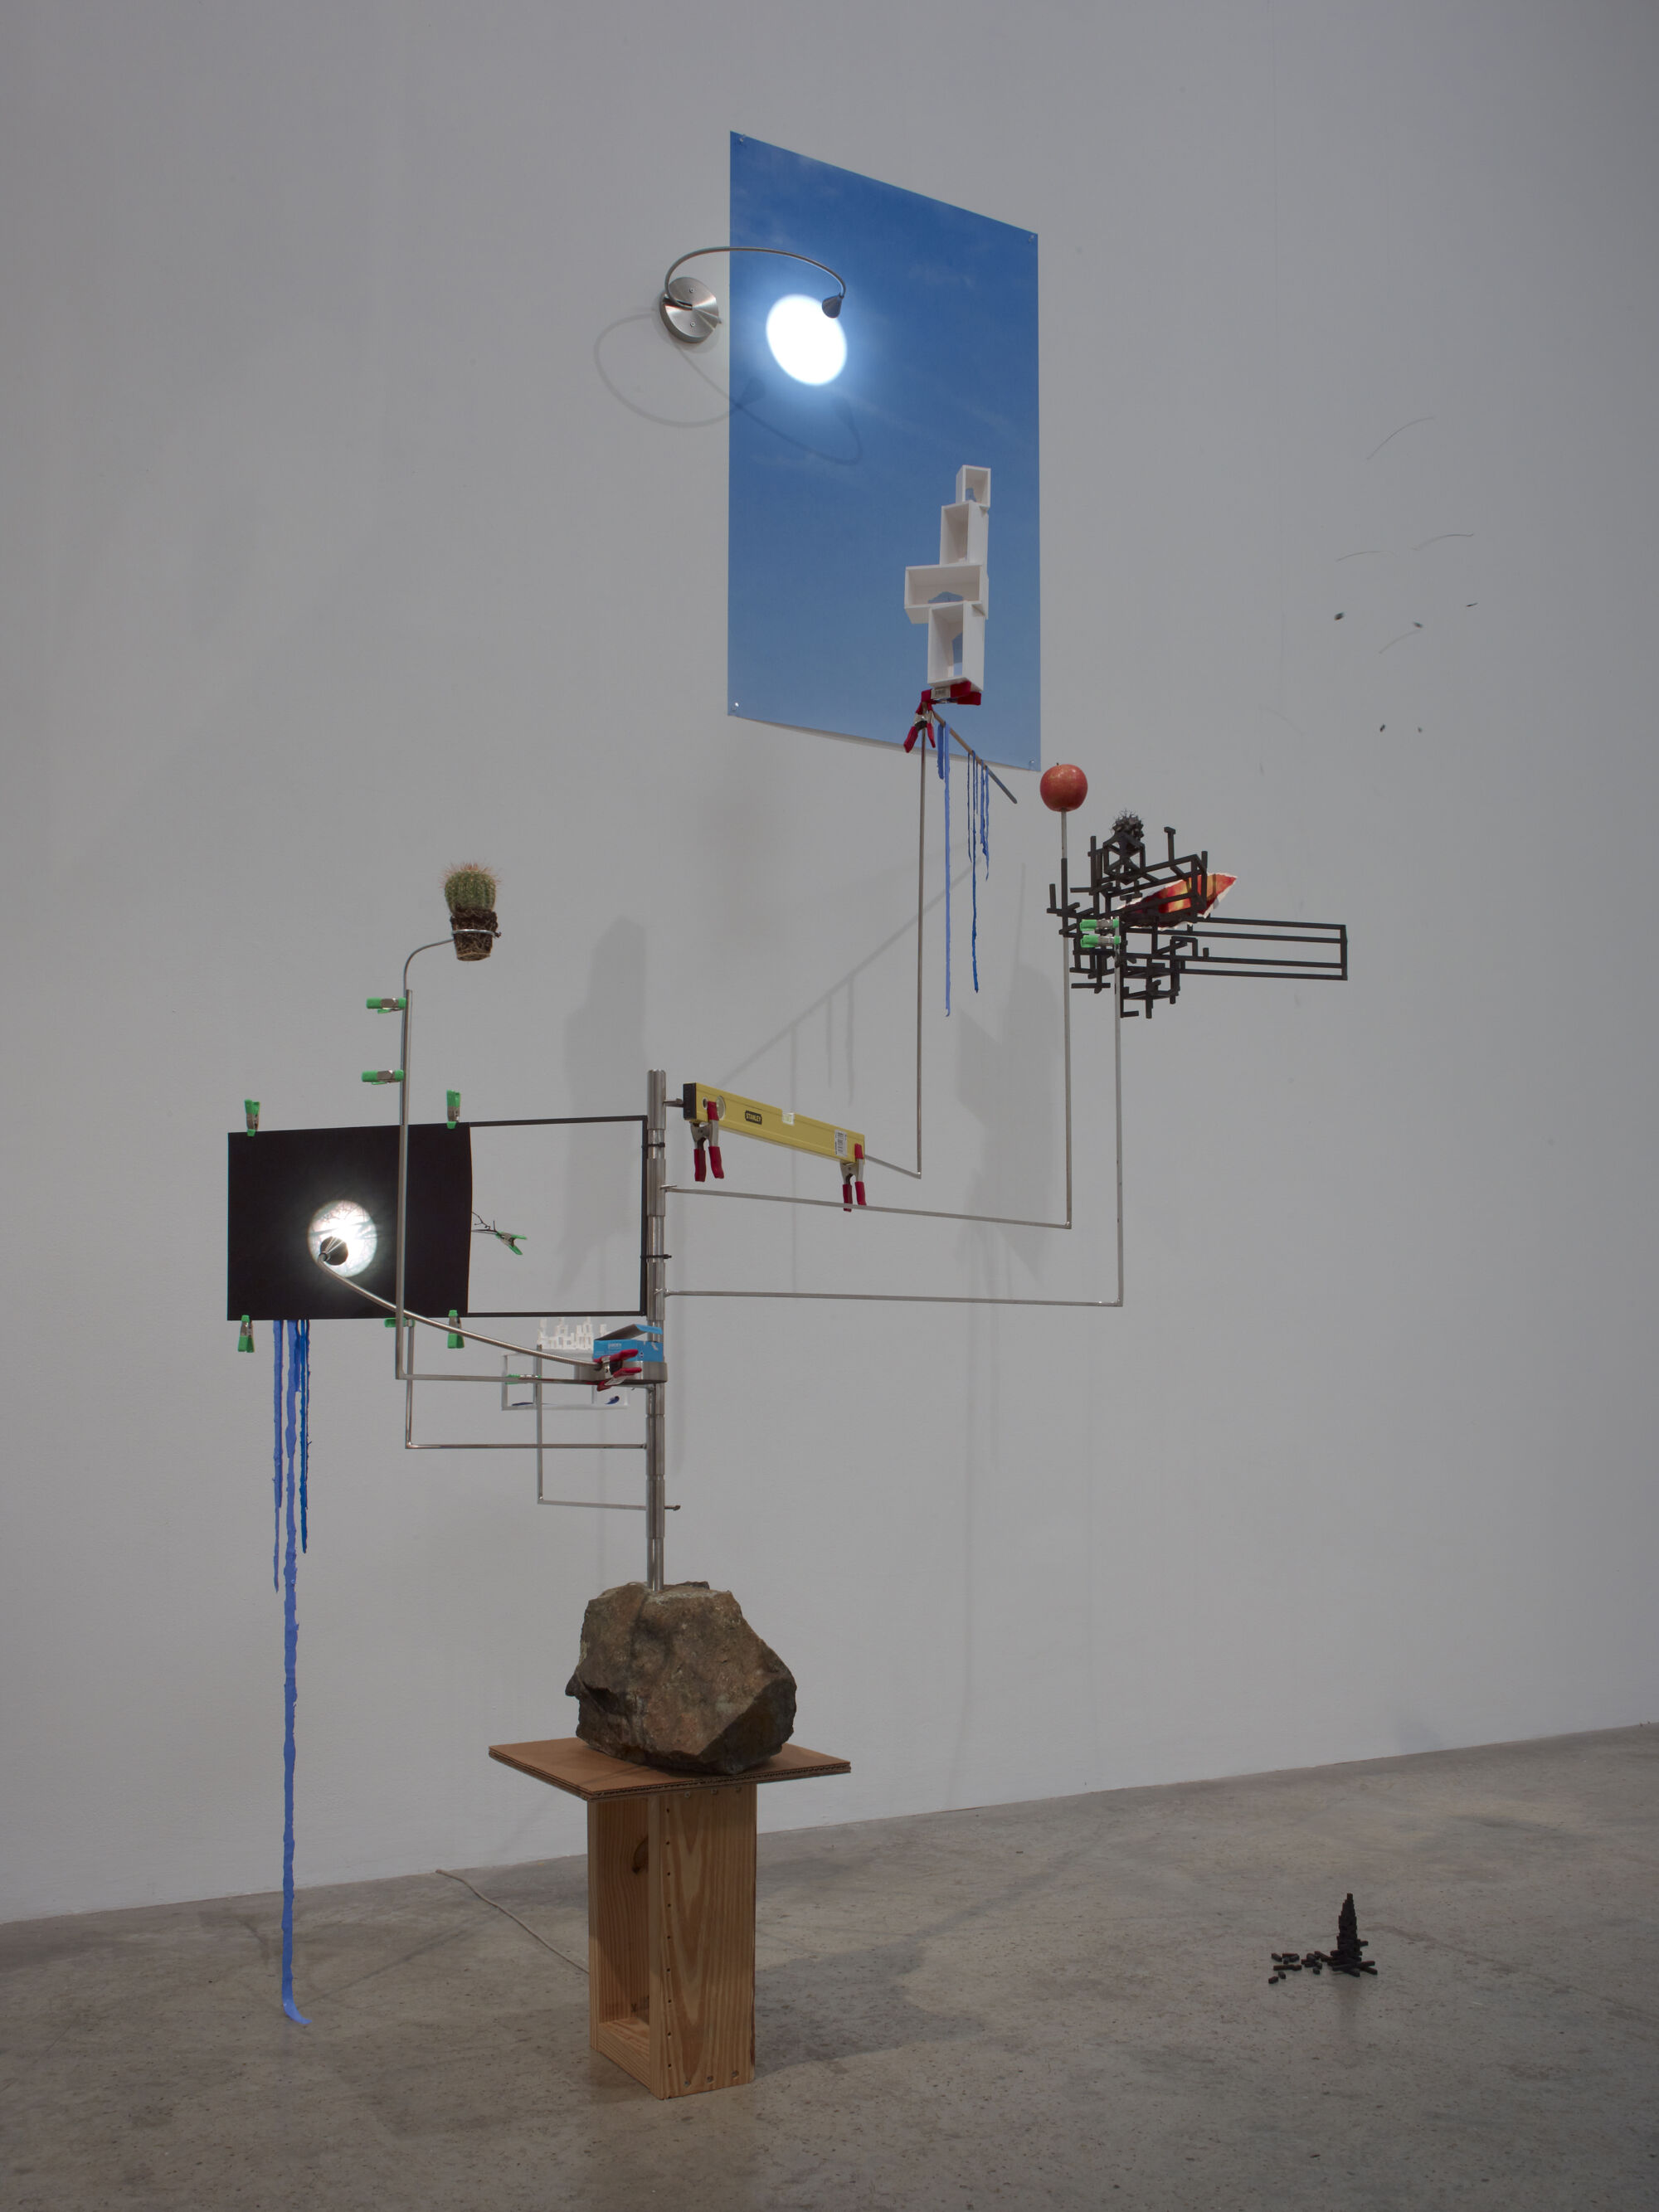 The Wick - Sarah Sze
Model for a Weather Vane, 2012
Mixed media, stainless steel, wood, stone, acrylic paint, archival prints, lamps, clamps
345.4 x 381 x 142.2 cm
136 x 150 x 56 in
© Sarah Sze
Courtesy the artist and Victoria Miro